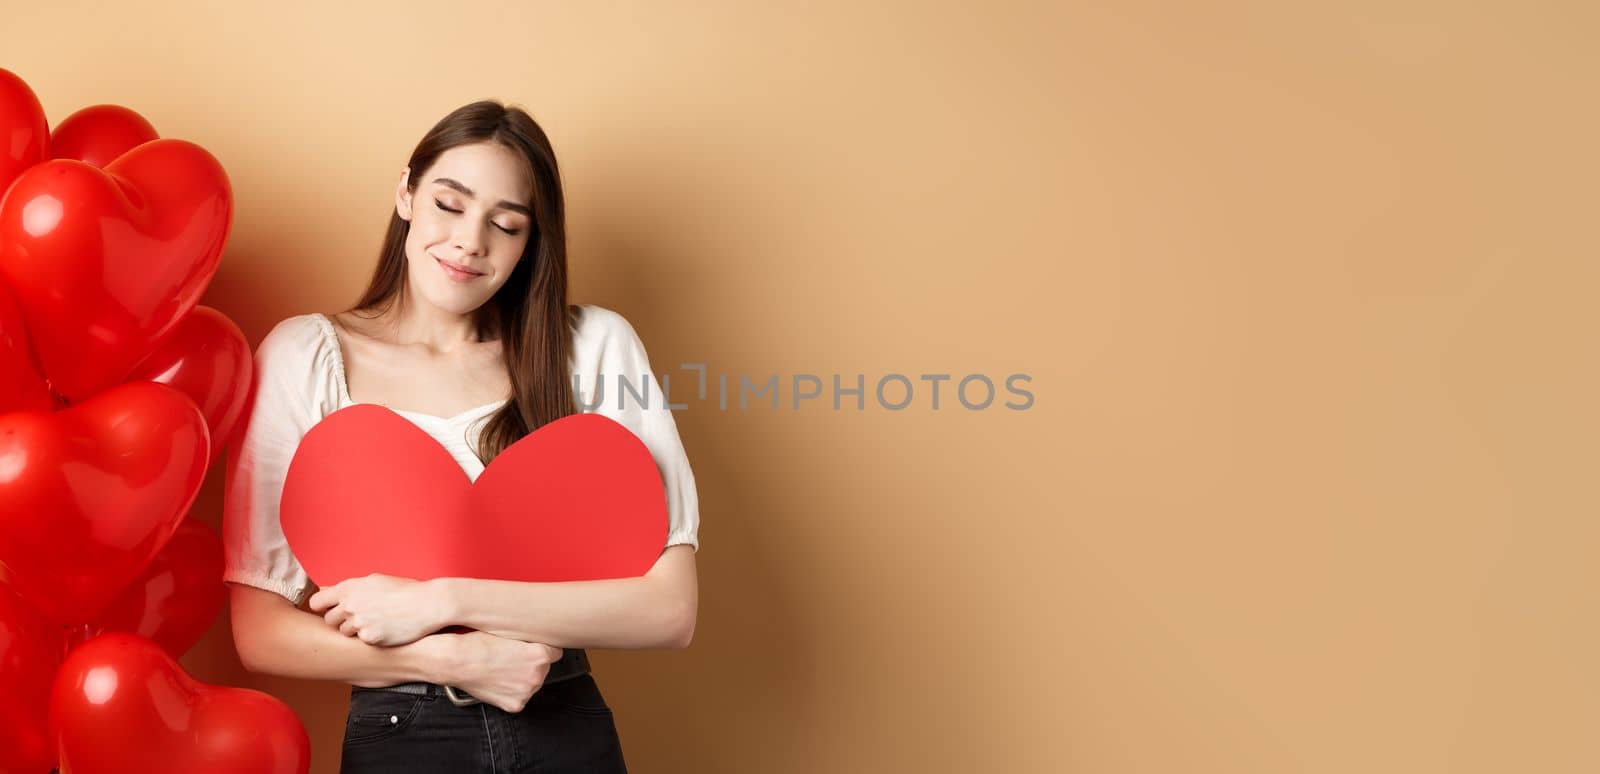 Romantic woman hugging big red heart and smiling dreamy, falling in love on Valentines day, dreaming about lover, standing on beige background near balloons by Benzoix